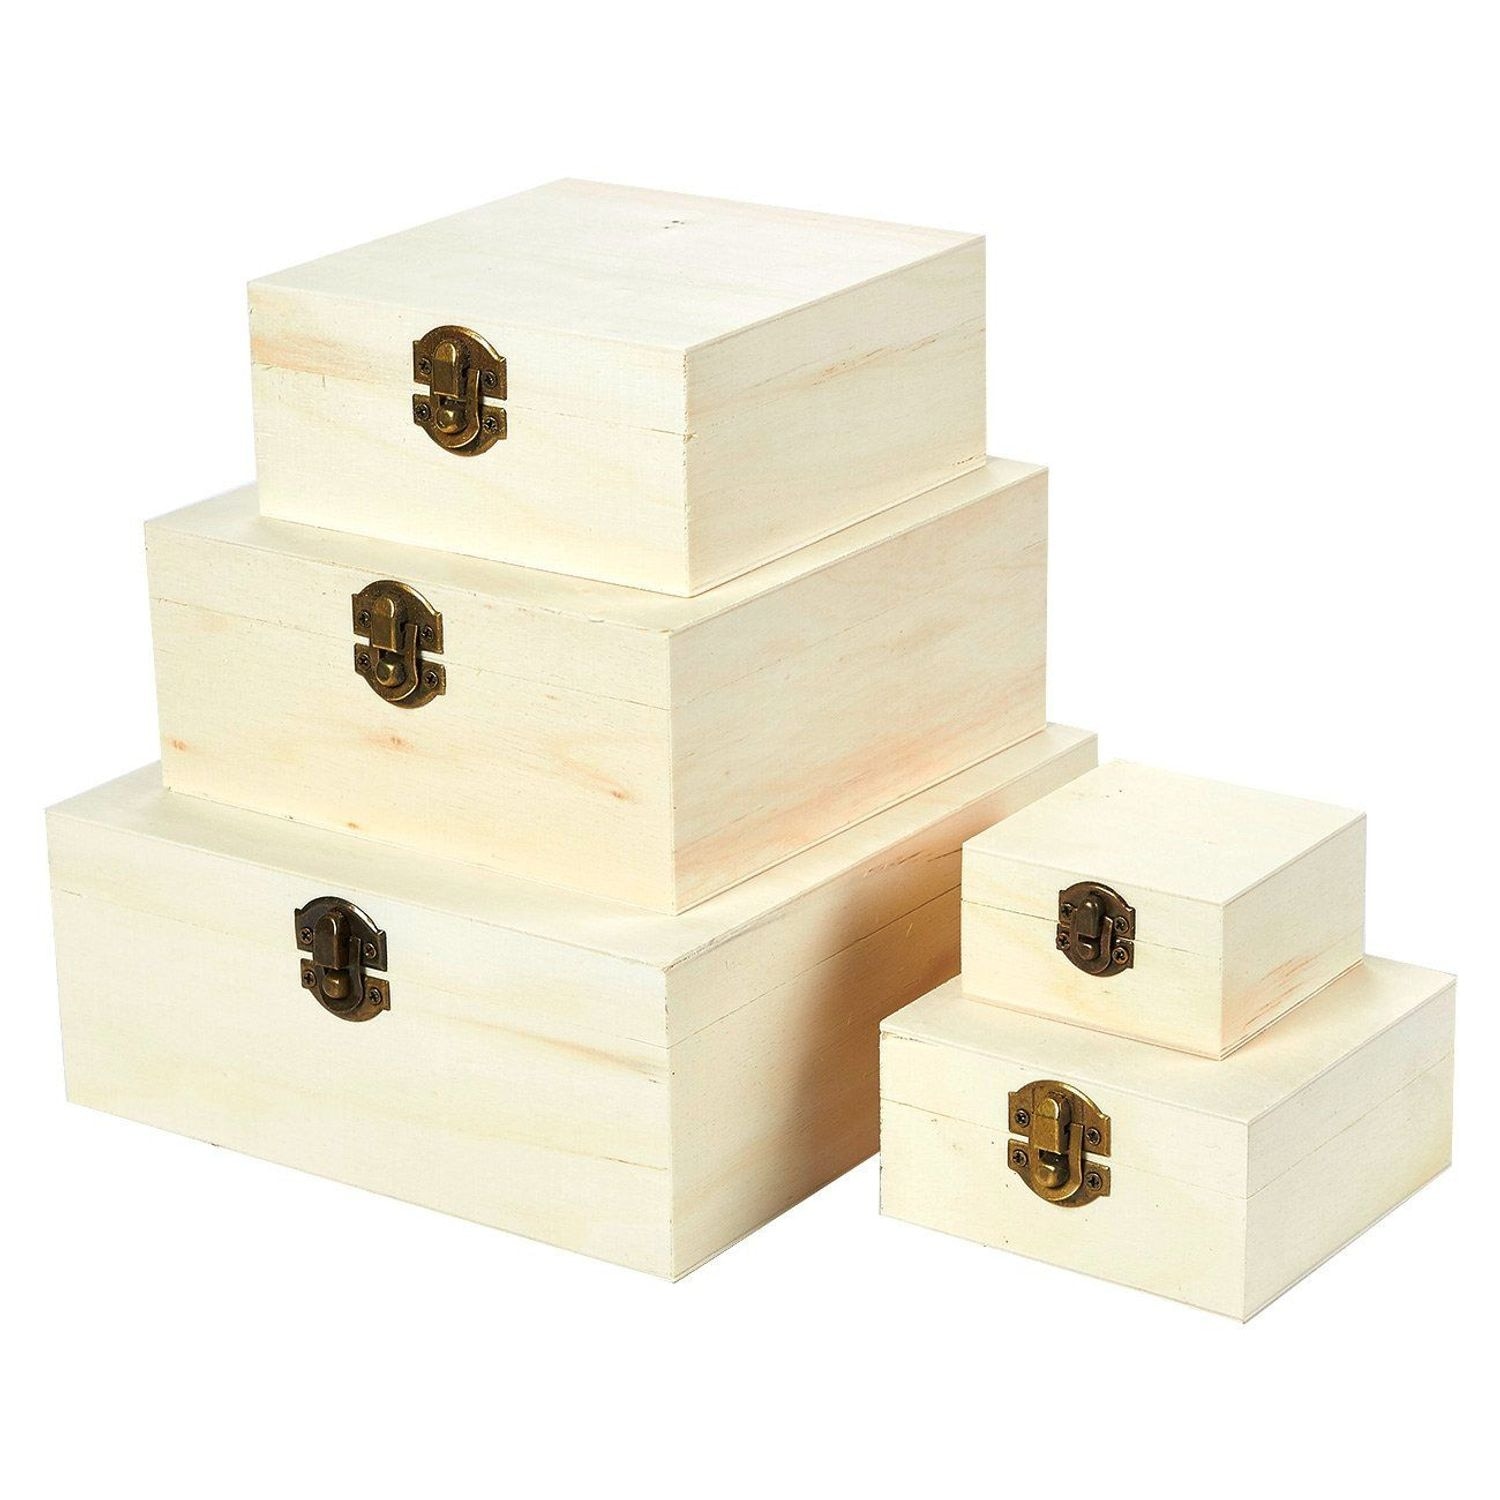 https://ak1.ostkcdn.com/images/products/is/images/direct/0f4beef185cf212e3d38290dbc91b4aa2be1006b/5-pcs-Wooden-Boxes-Hinged-Lid-Nesting-Boxes%2C-Unfinish-Wood%2C-Natural-Wood%2C-Small.jpg